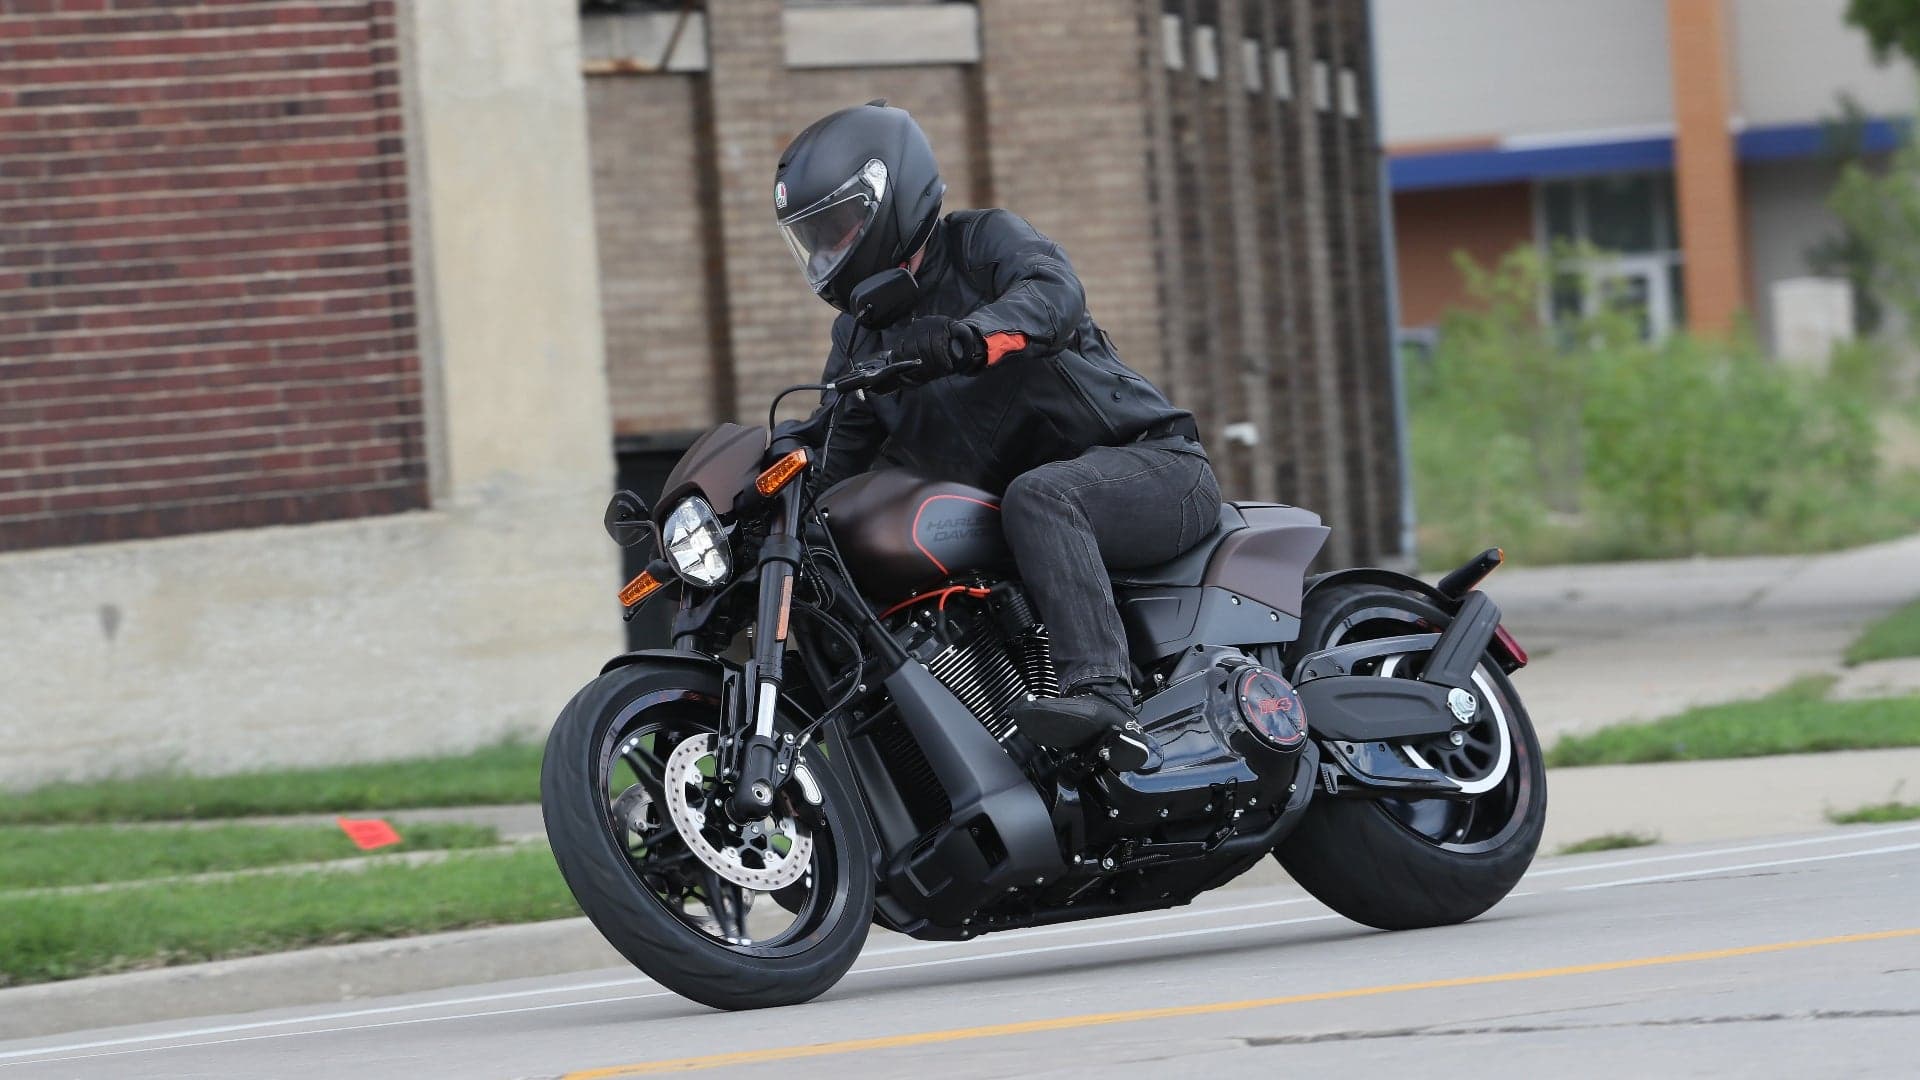 2019 Harley-Davidson FXDR 114 First Ride Review: Strong Performance, Ridiculous Ergonomics